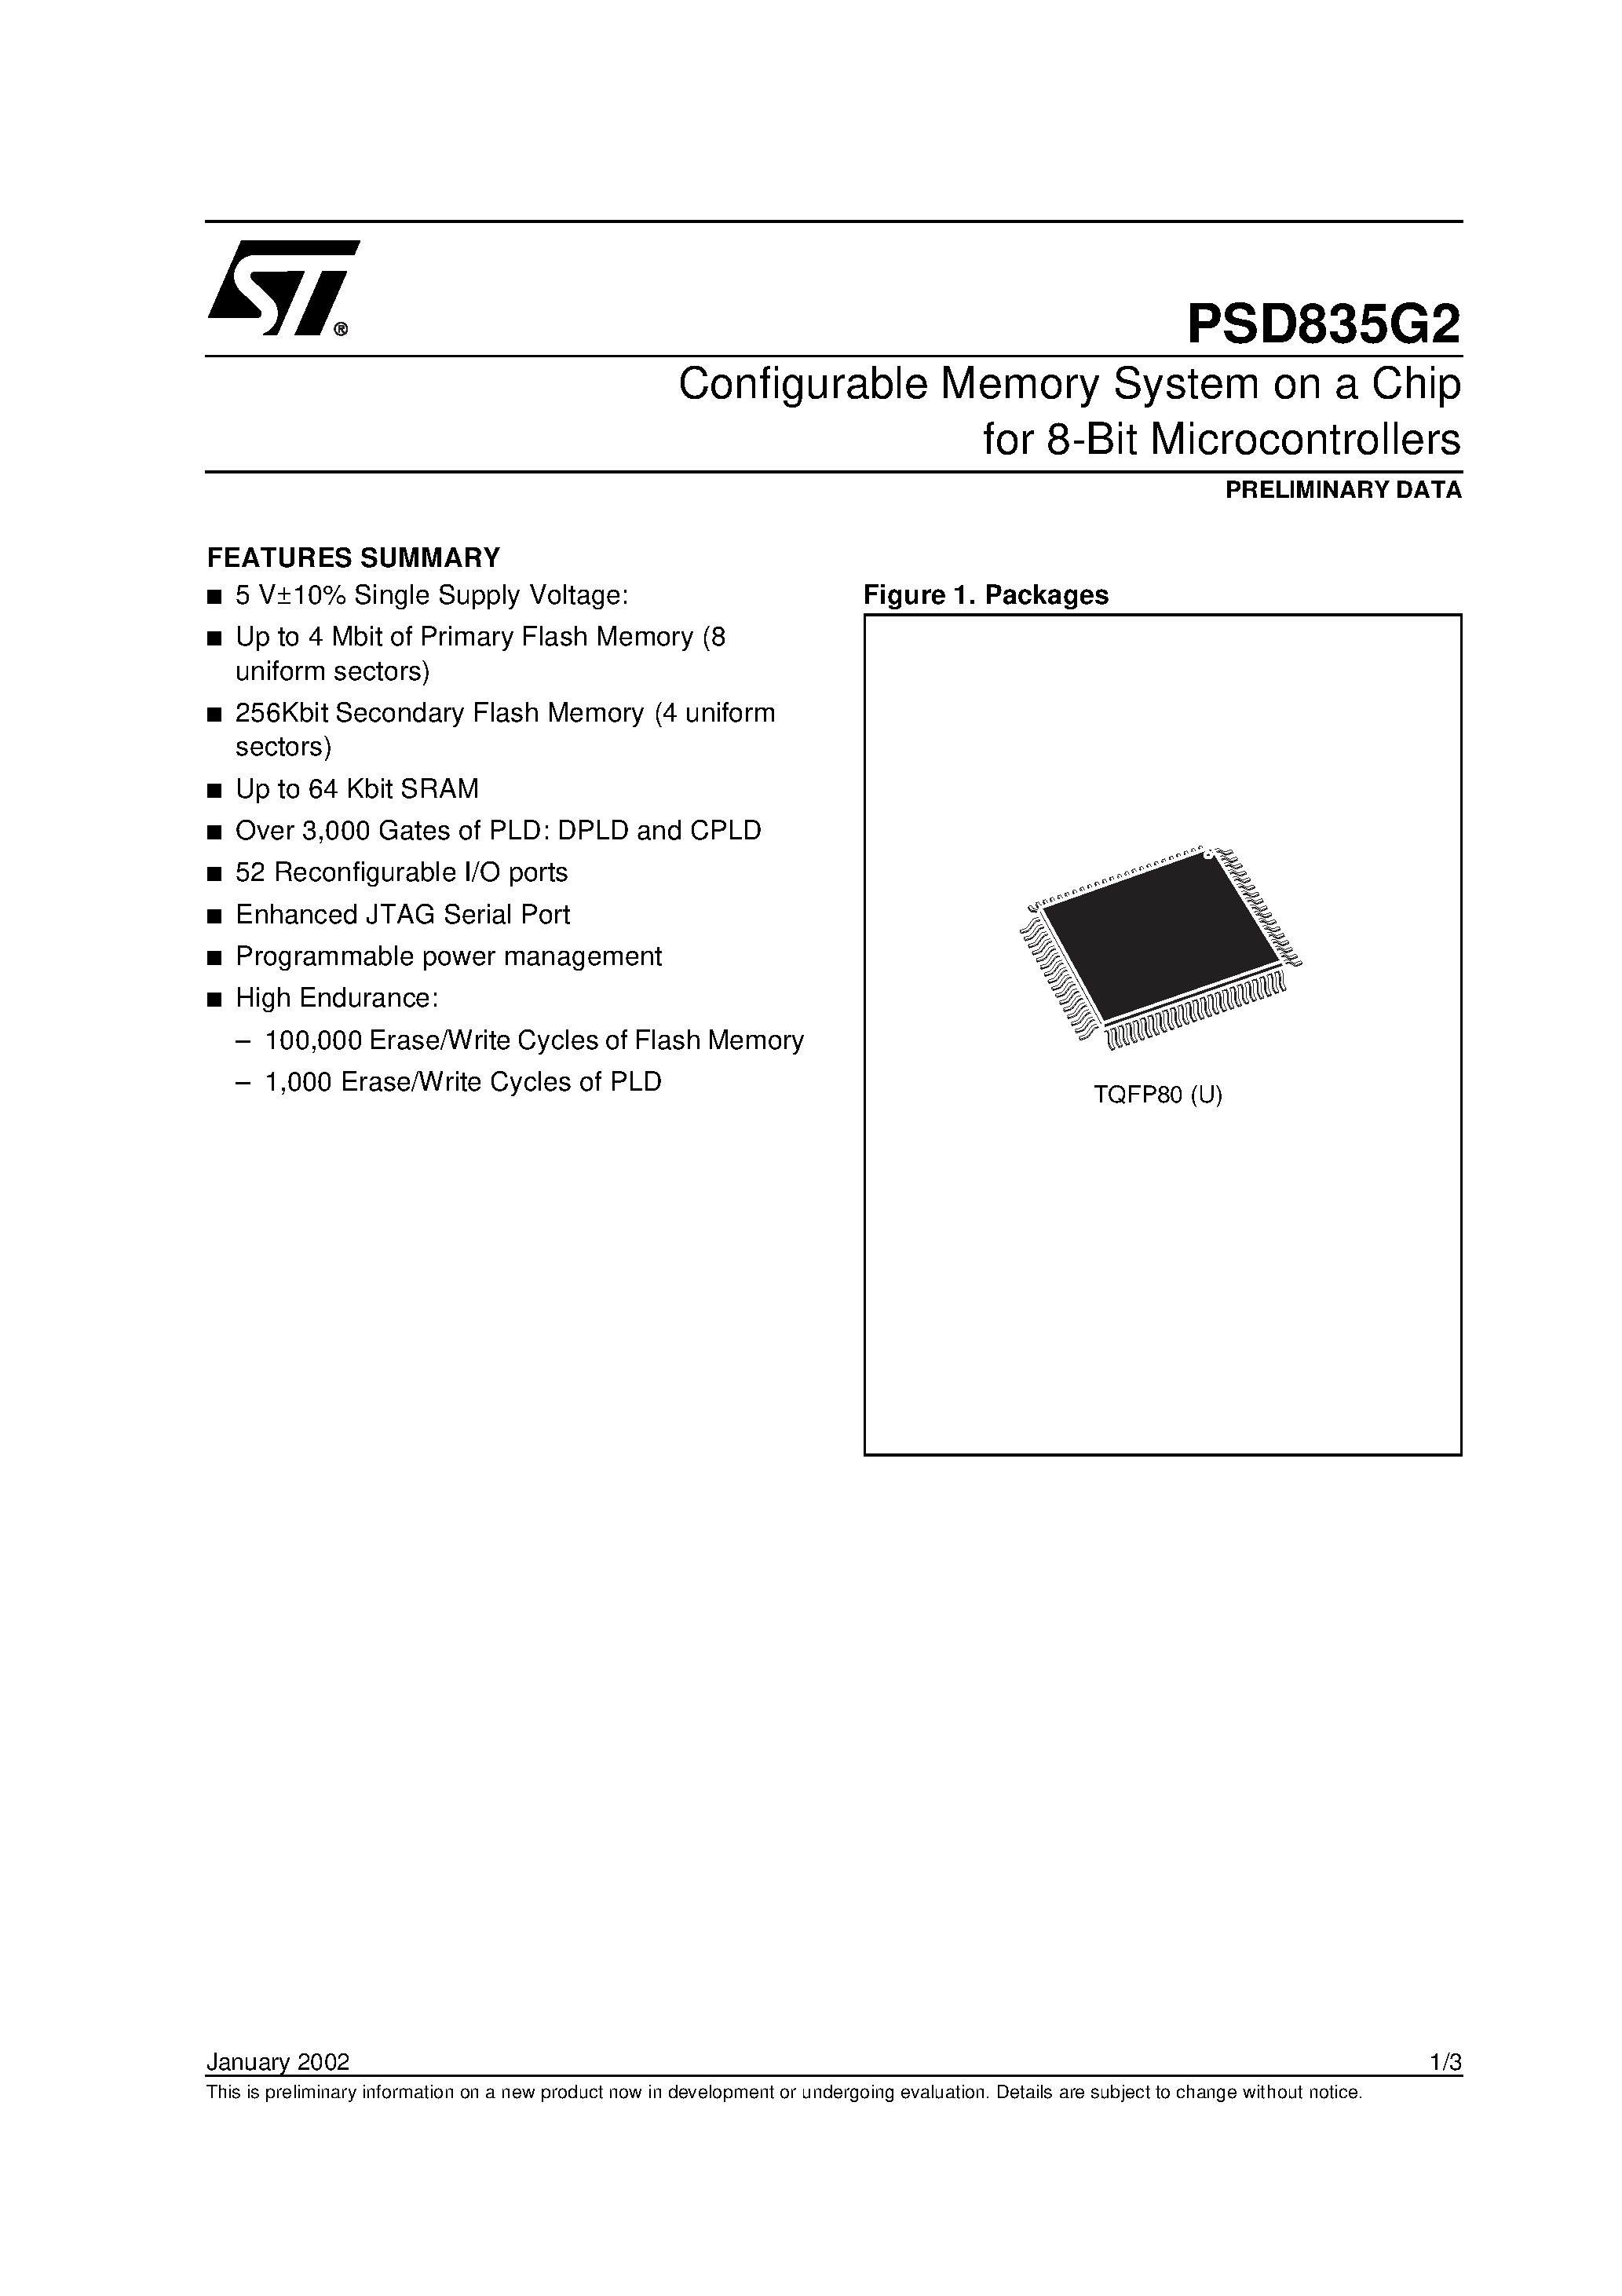 Datasheet PSD835F2-A-70JI - Configurable Memory System on a Chip for 8-Bit Microcontrollers page 1